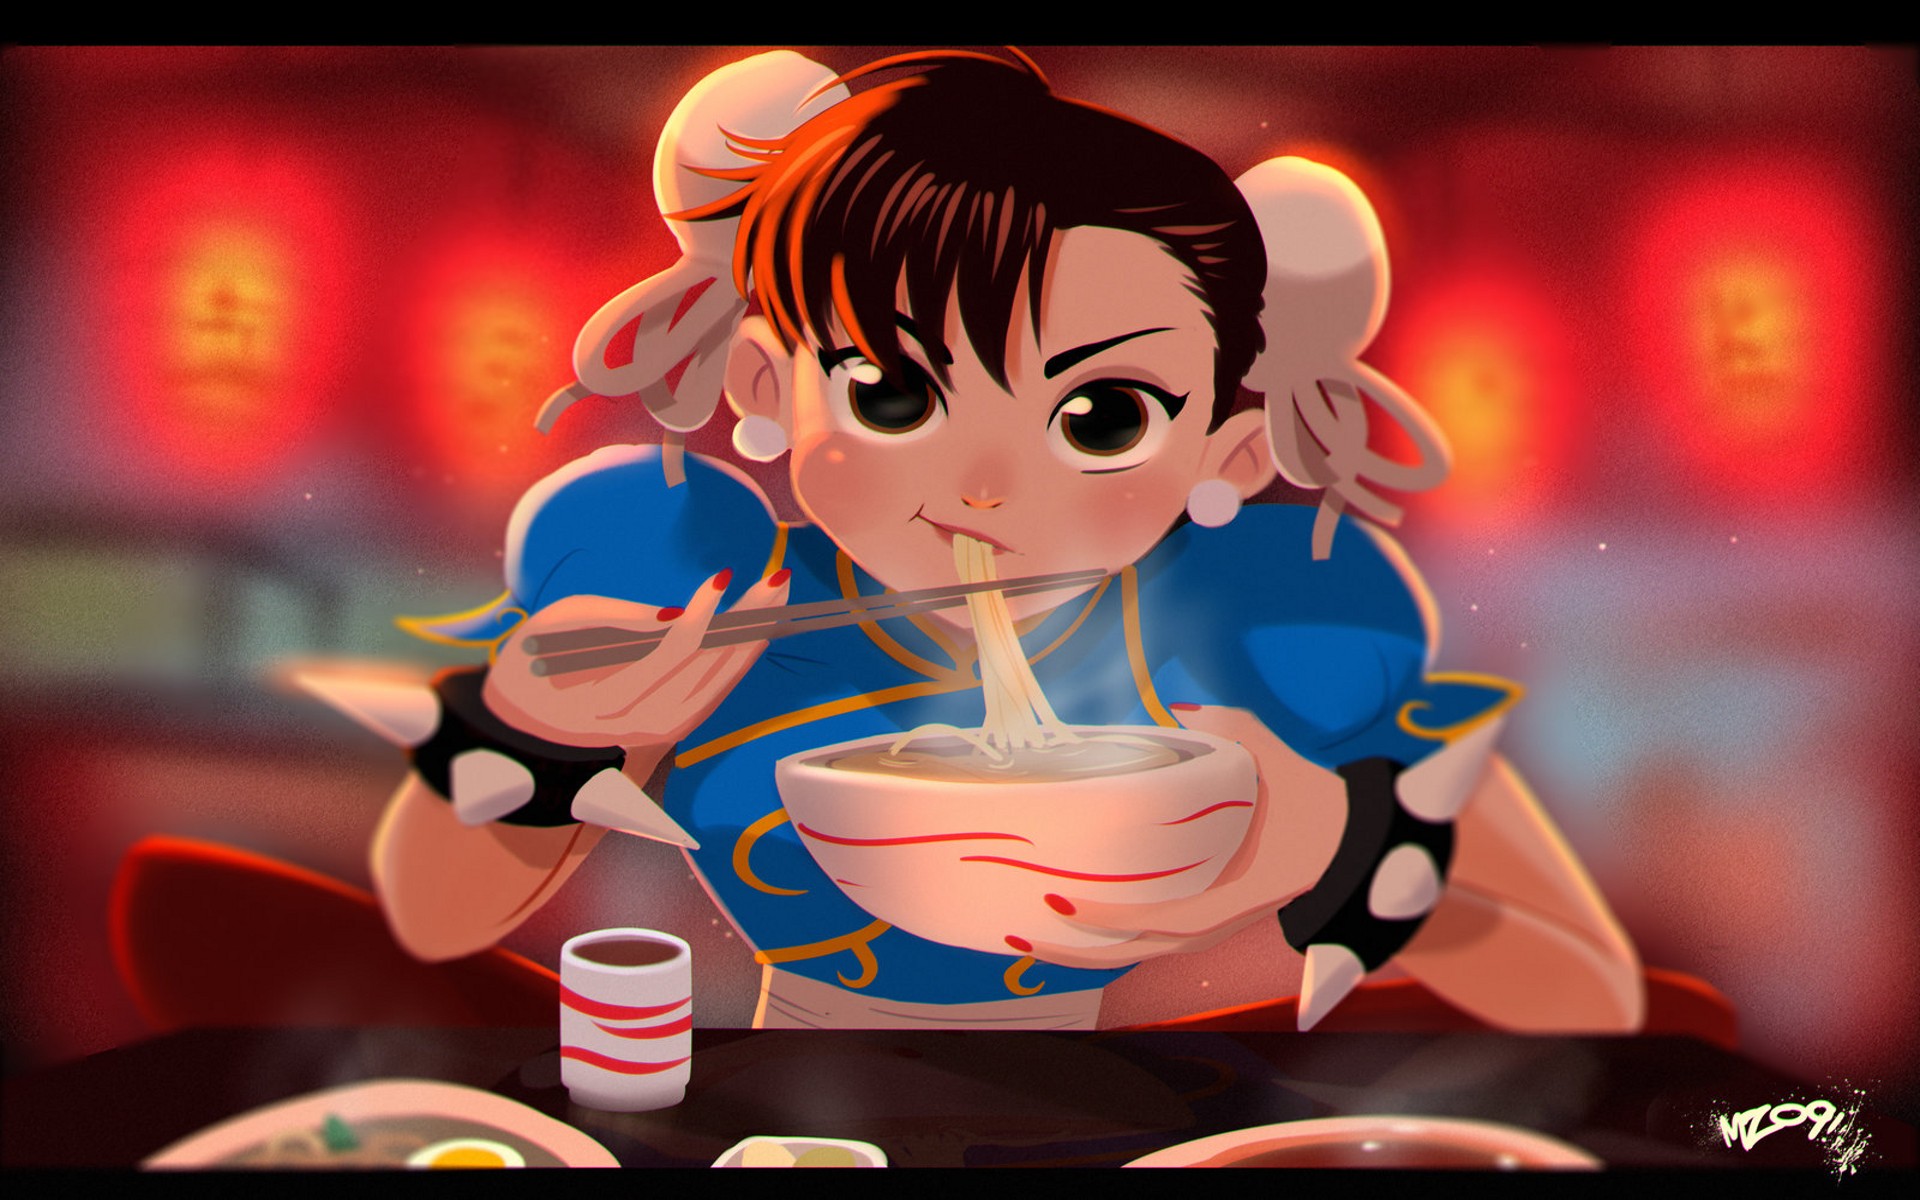 Anime 1920x1200 Chun-Li Street Fighter video game girls anime girls anime anime girls eating dark eyes video game art video game warriors painted nails red nails artwork